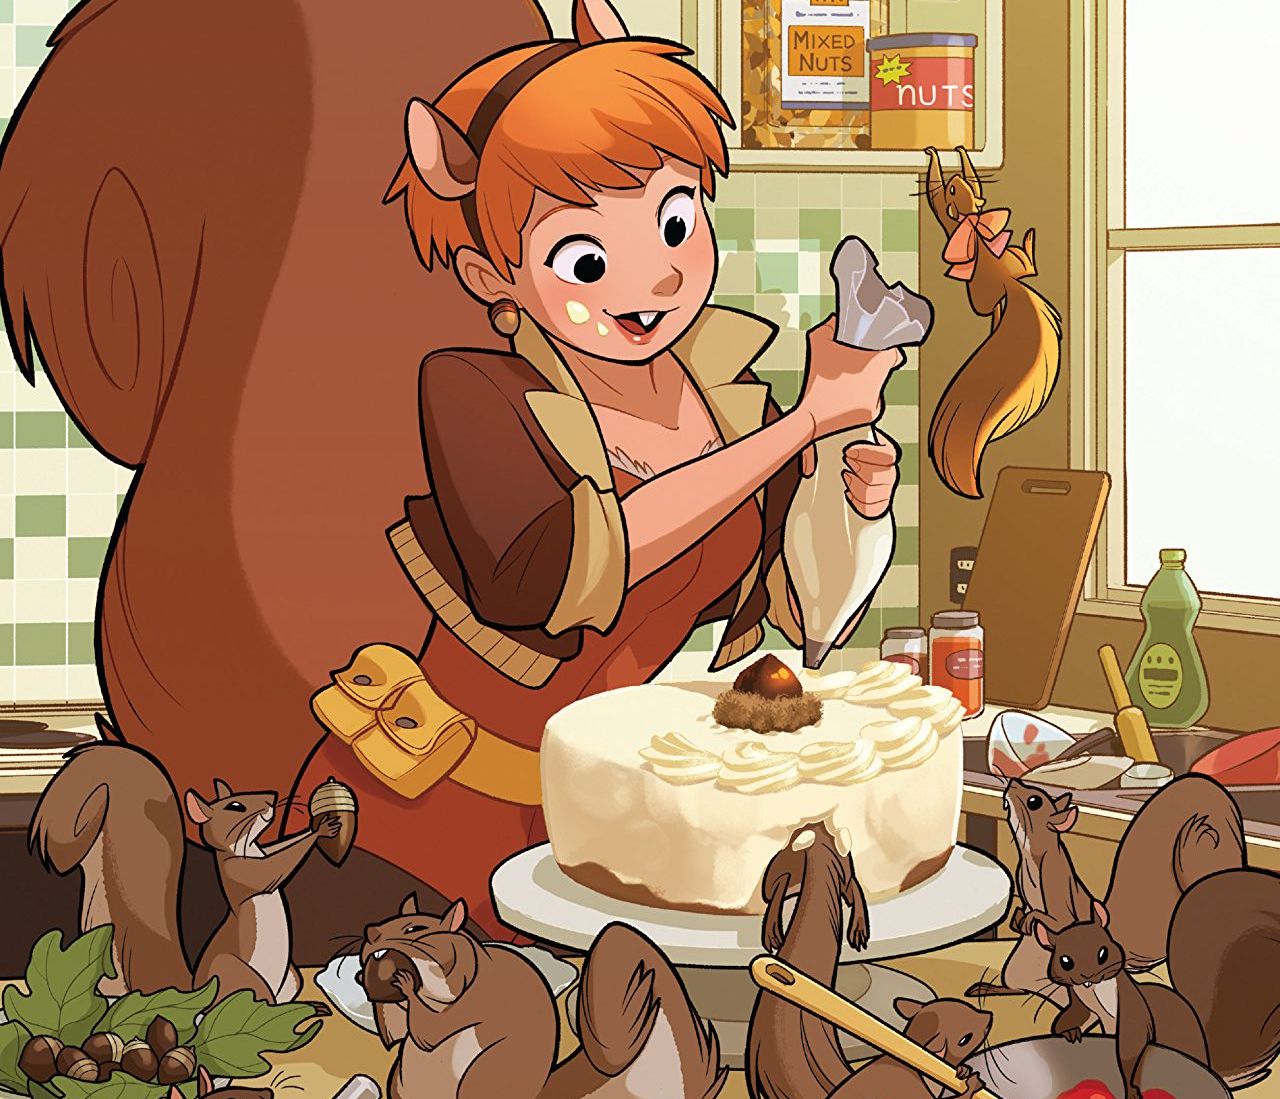 The Unbeatable Squirrel Girl: Powers of a Squirrel Review